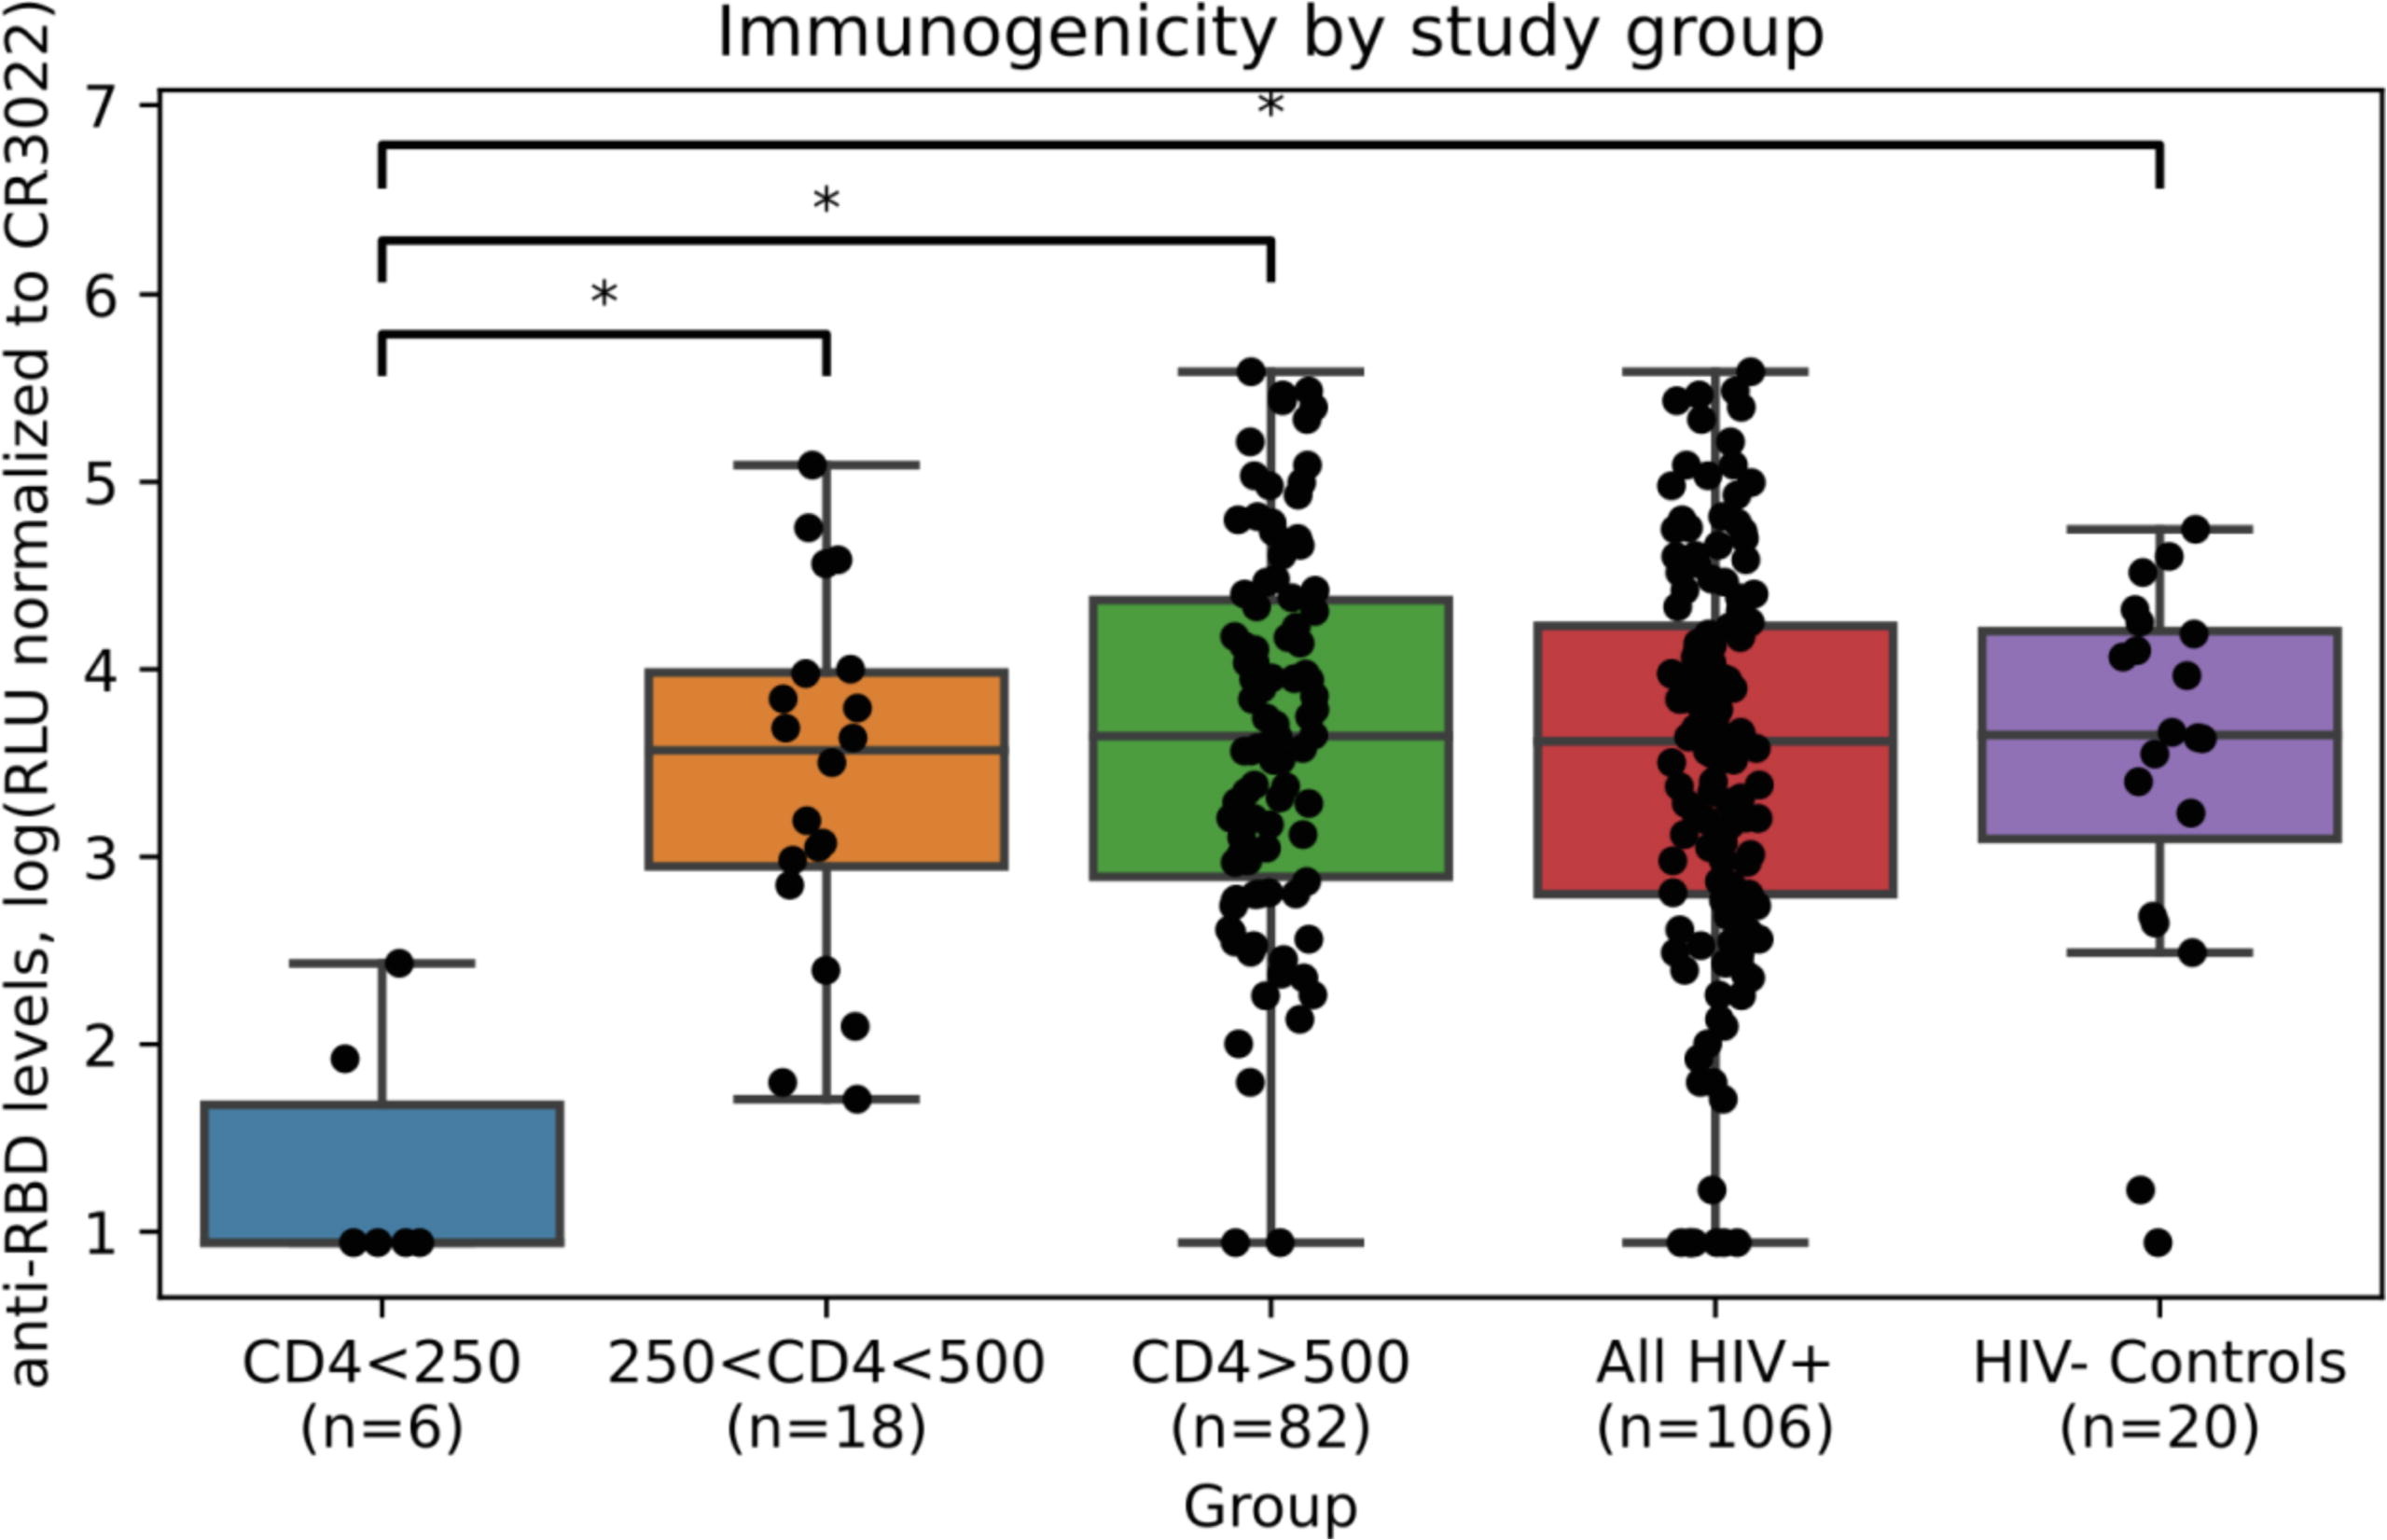 Immunogenicity in each study group. Immunogenicity (anti-RBD IgG response) was measured by ELISA and reported in RLU (relative luminescence units) normalized to CR3022. 